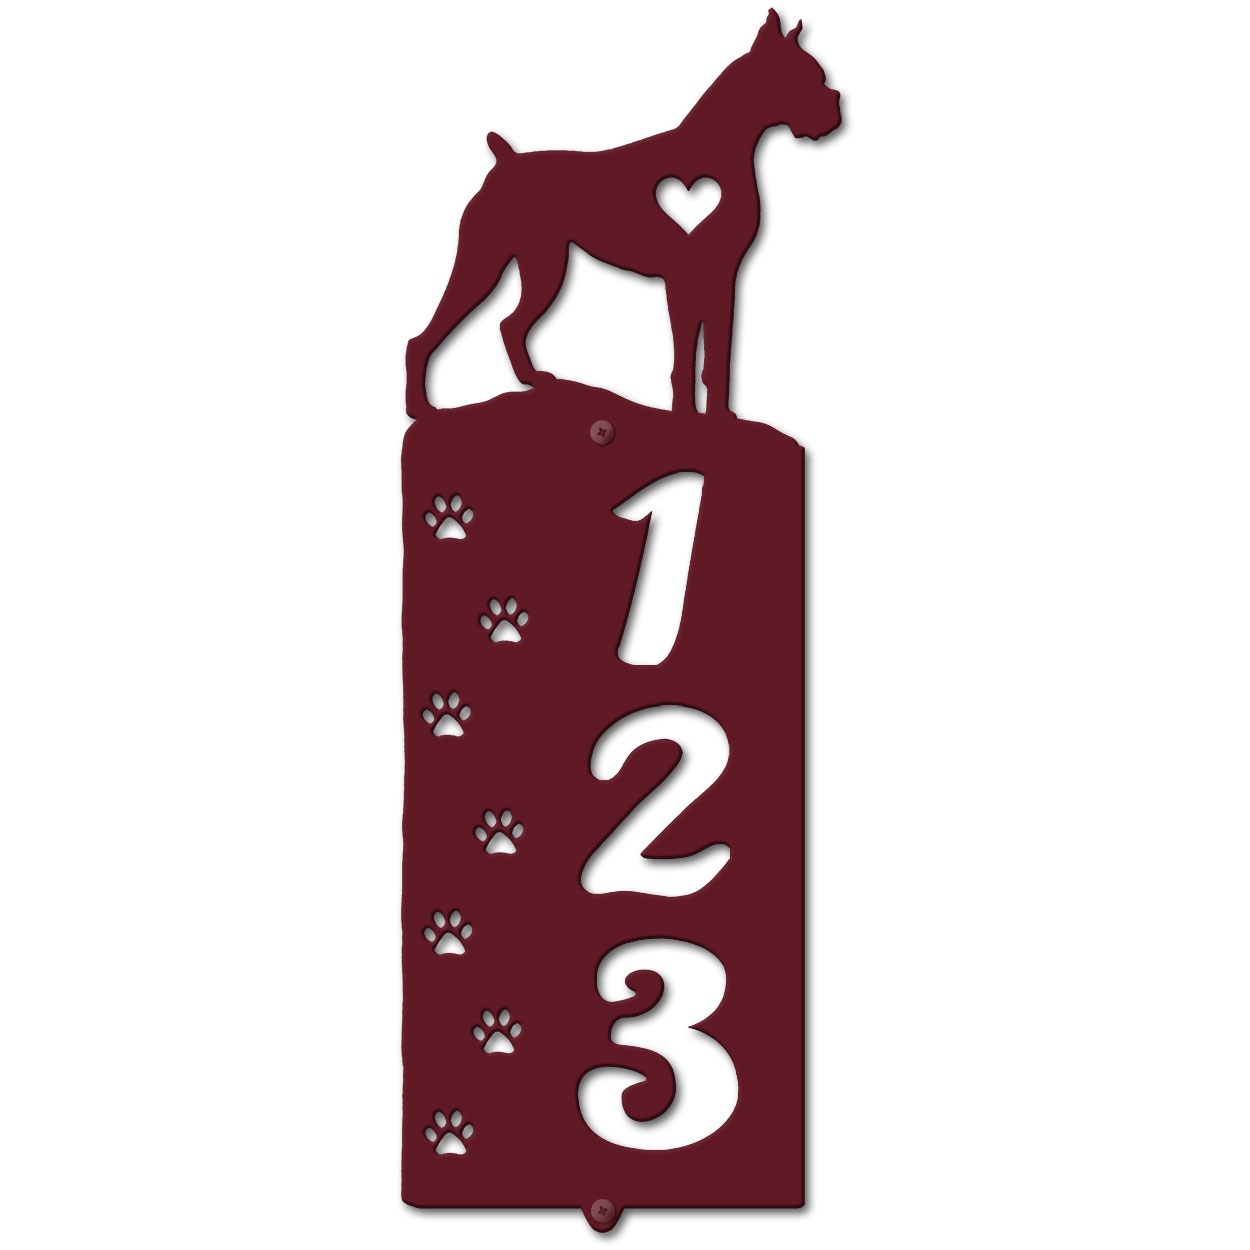 636163 - Boxer Cut Outs Three Digit Address Number Plaque